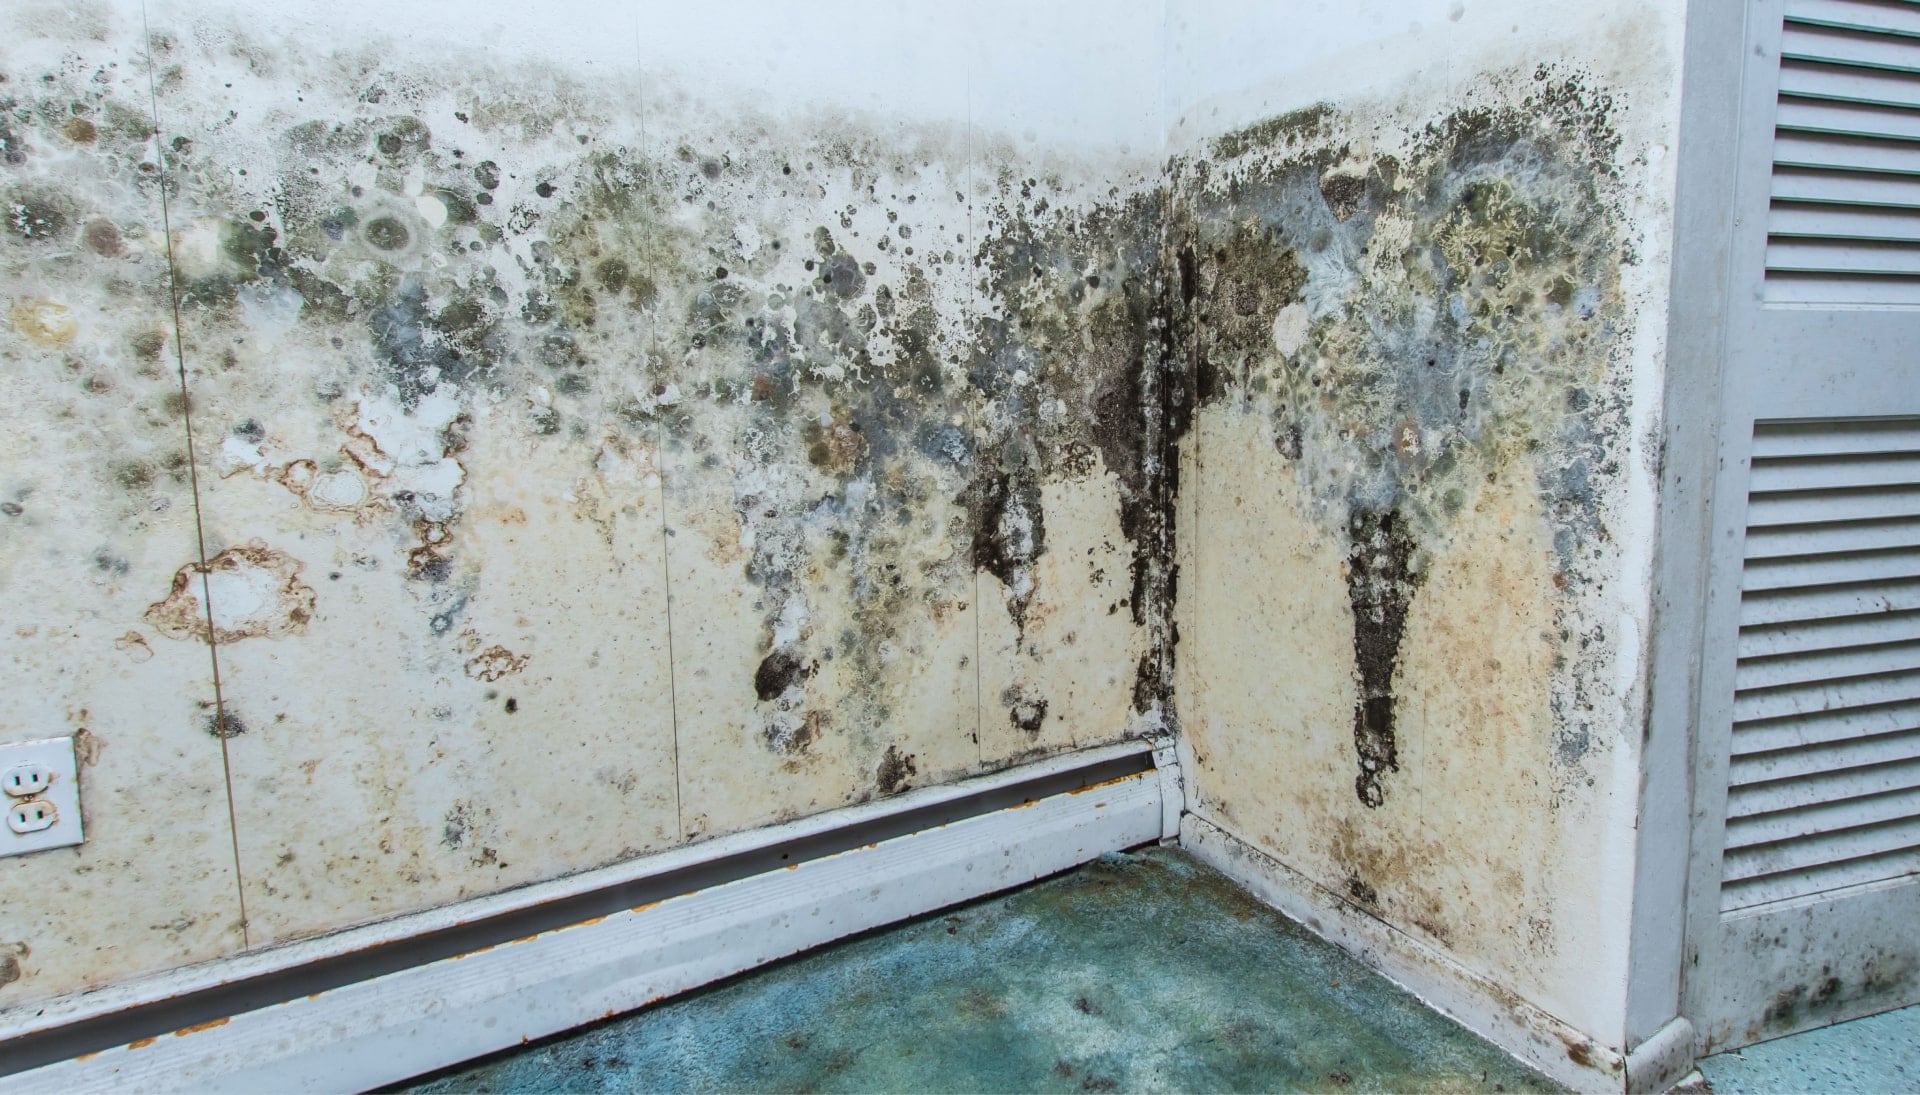 A mold remediation team using specialized techniques to remove mold damage and control odors in a Naperville property, with a focus on safety and efficiency